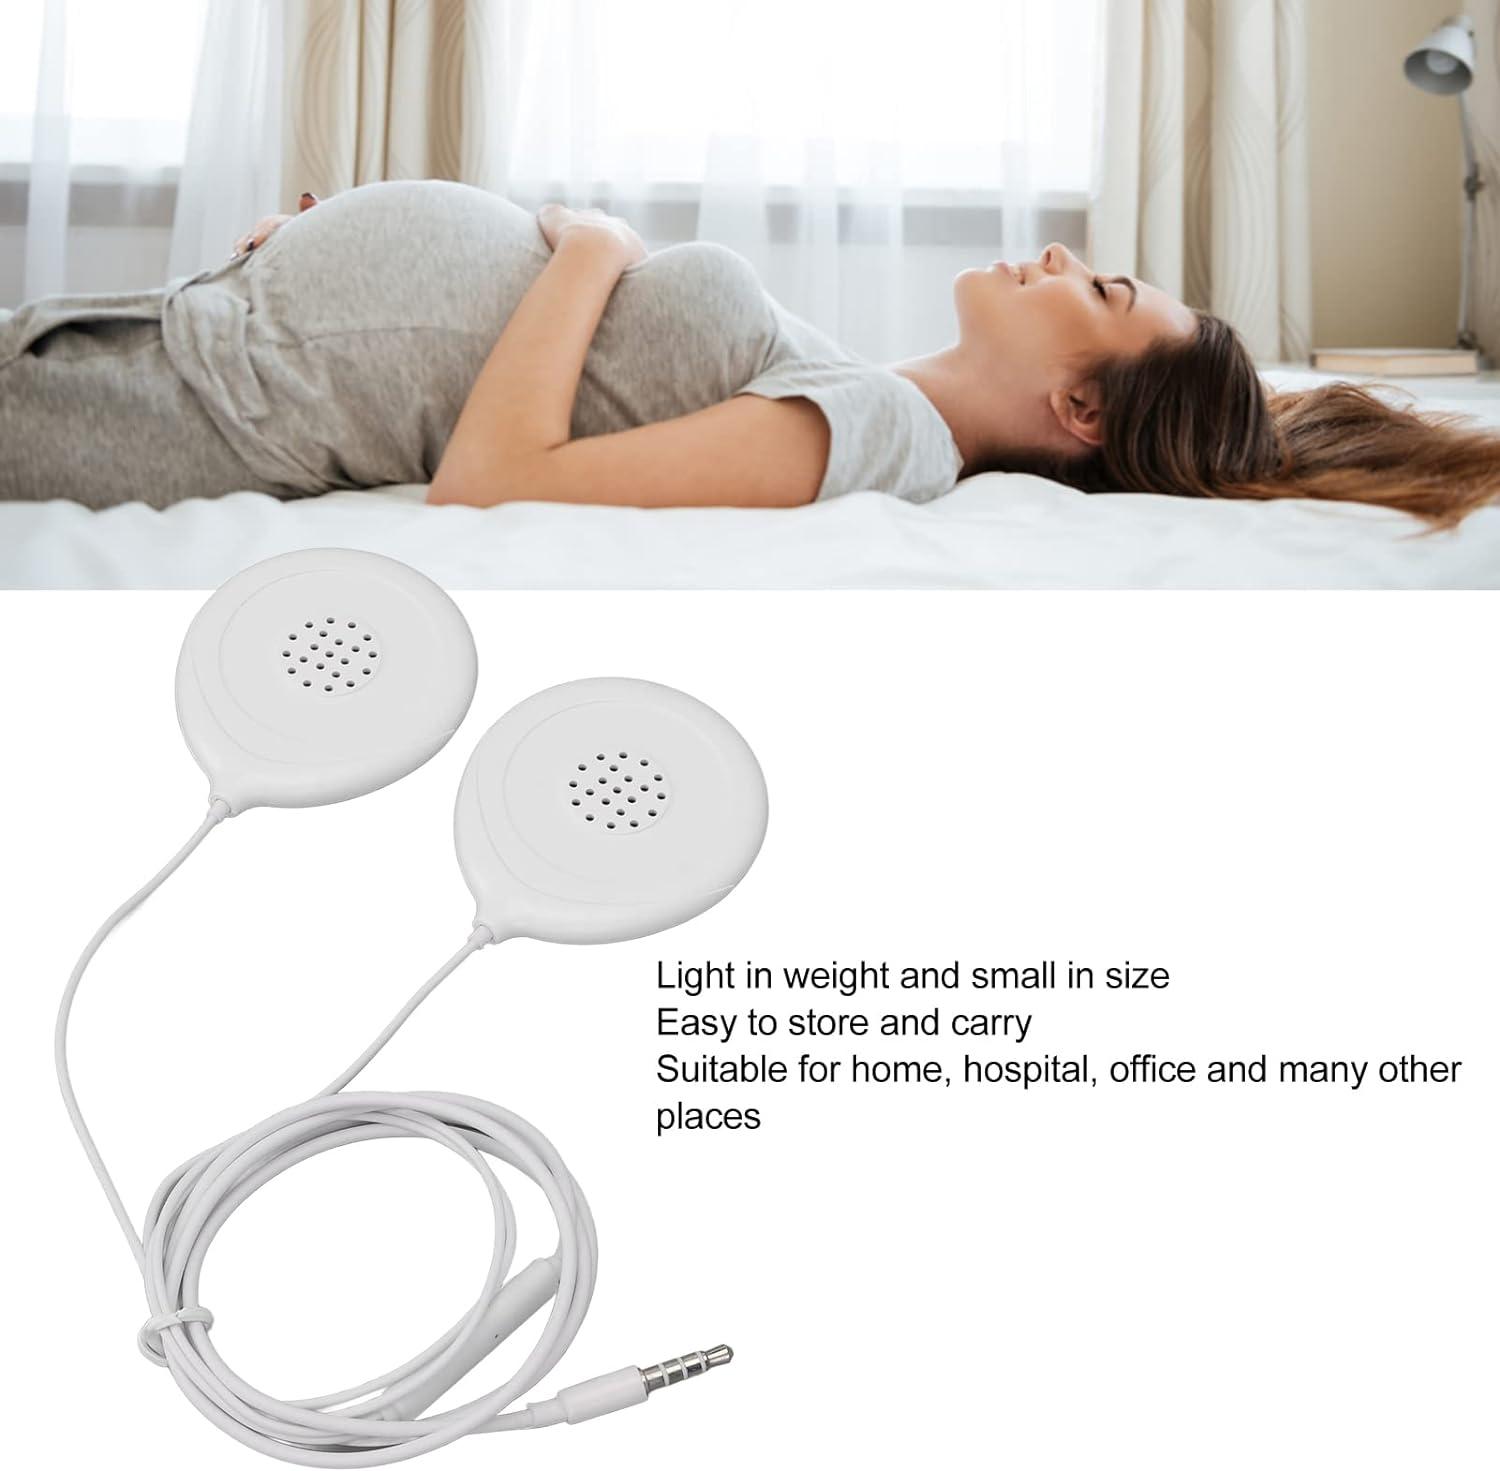 Baby Bump Headphones Prenatal Belly Speakers for Women During  Pregnancy,Safely Play Music, Sounds to Your Baby in The Womb Pregnant Woman